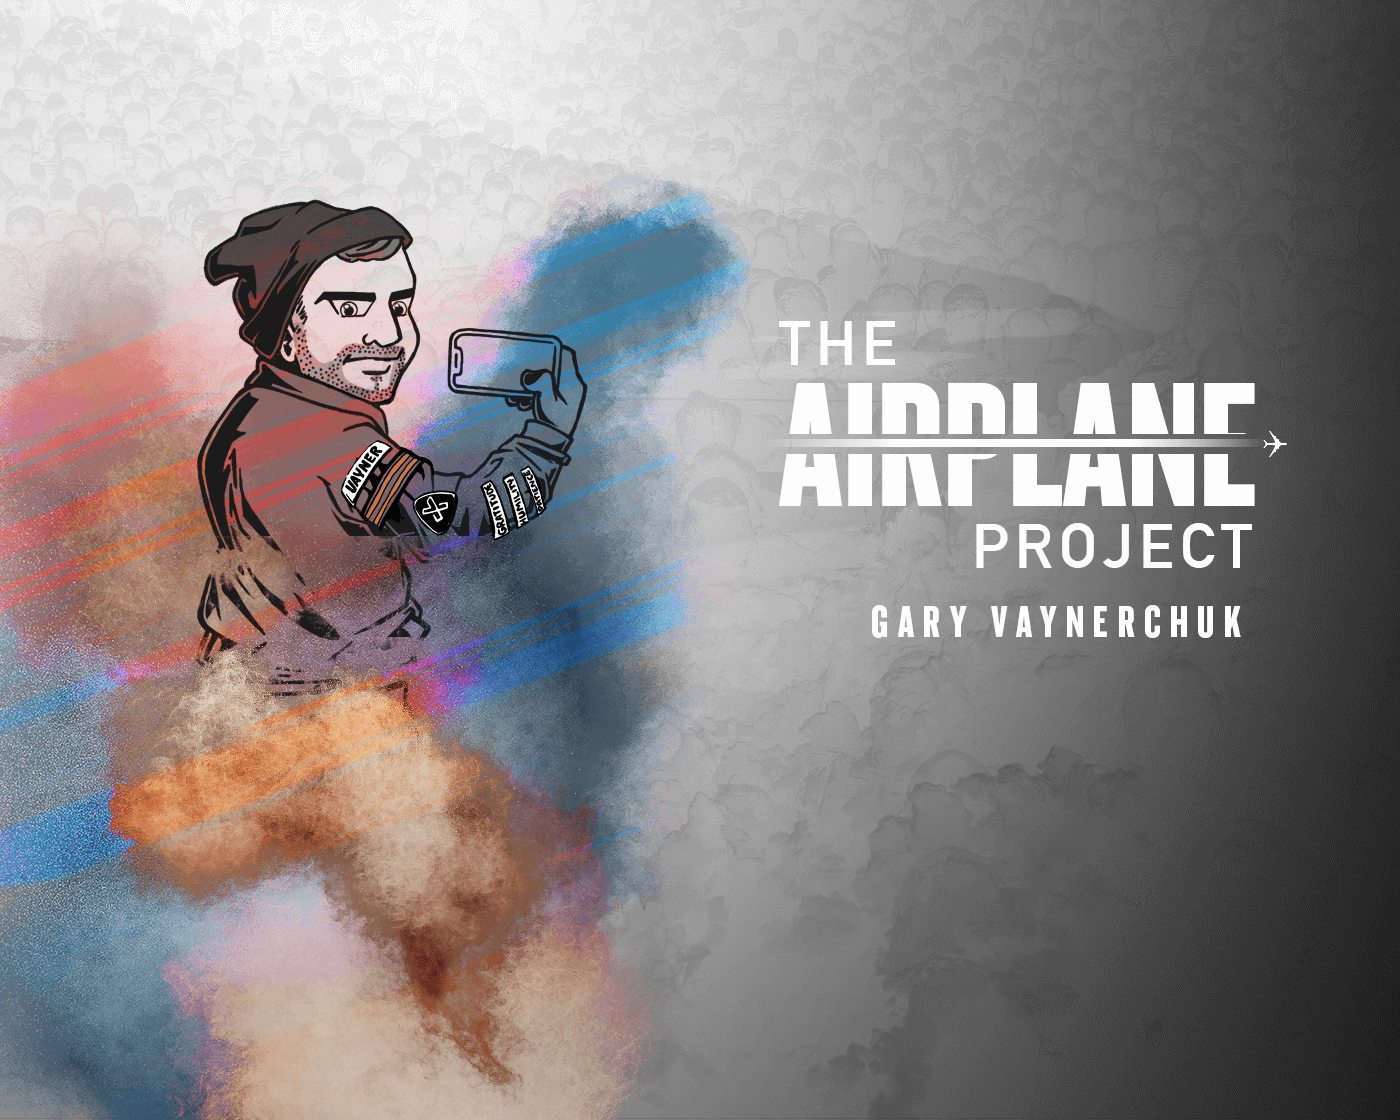 The Airplane Project